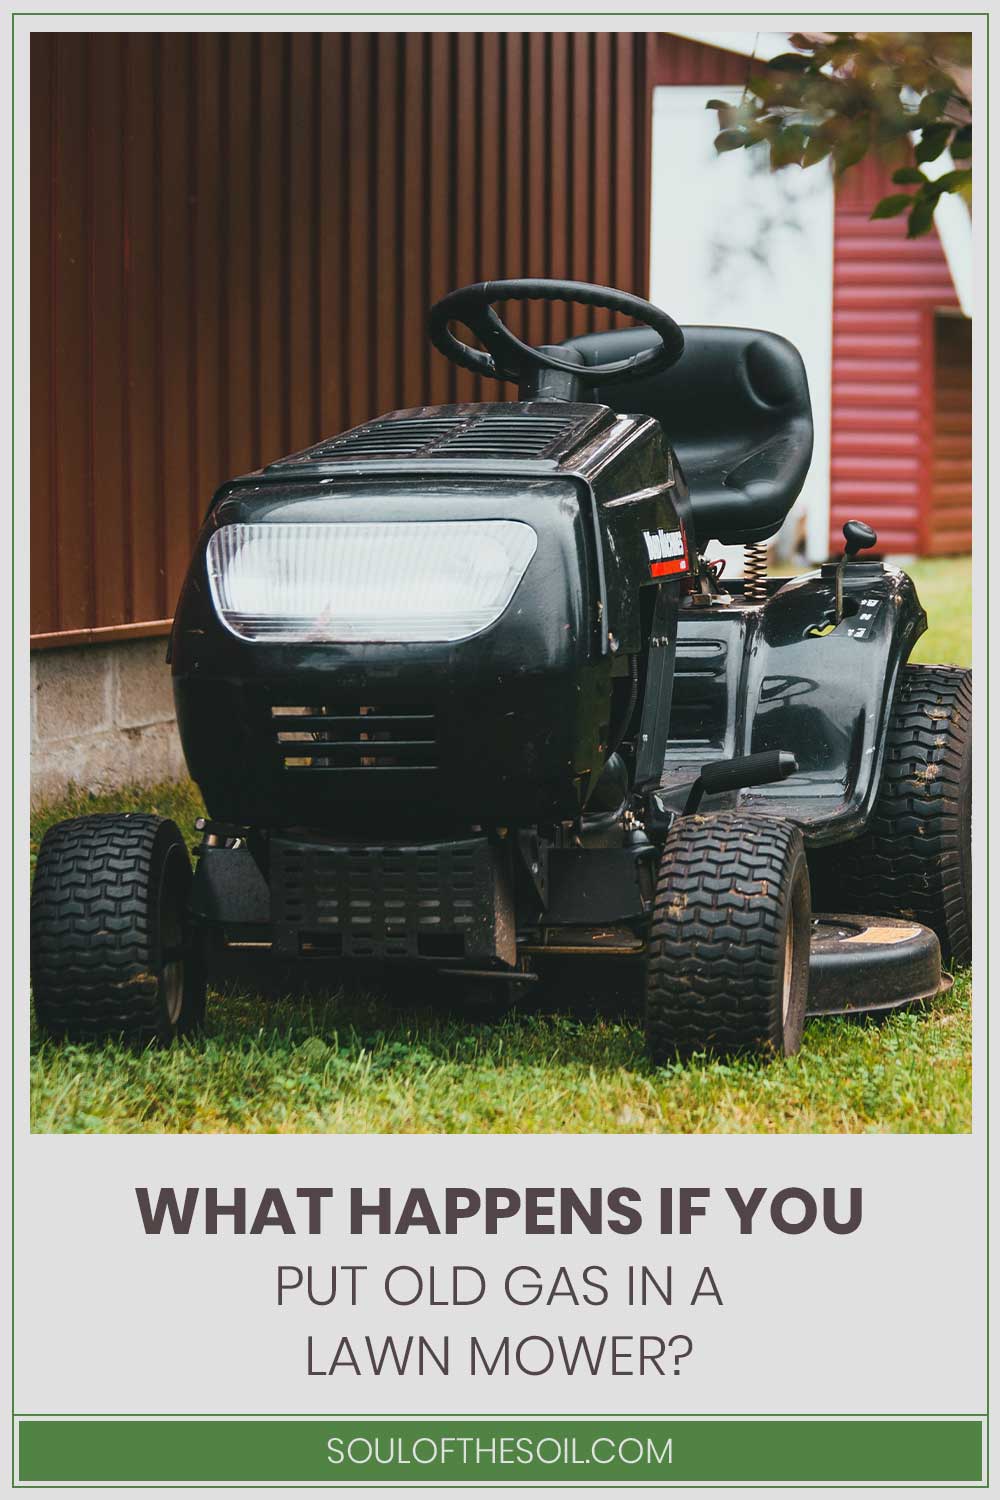 A black lawn mower on grass - What Happens If You Put Old Gas In it?